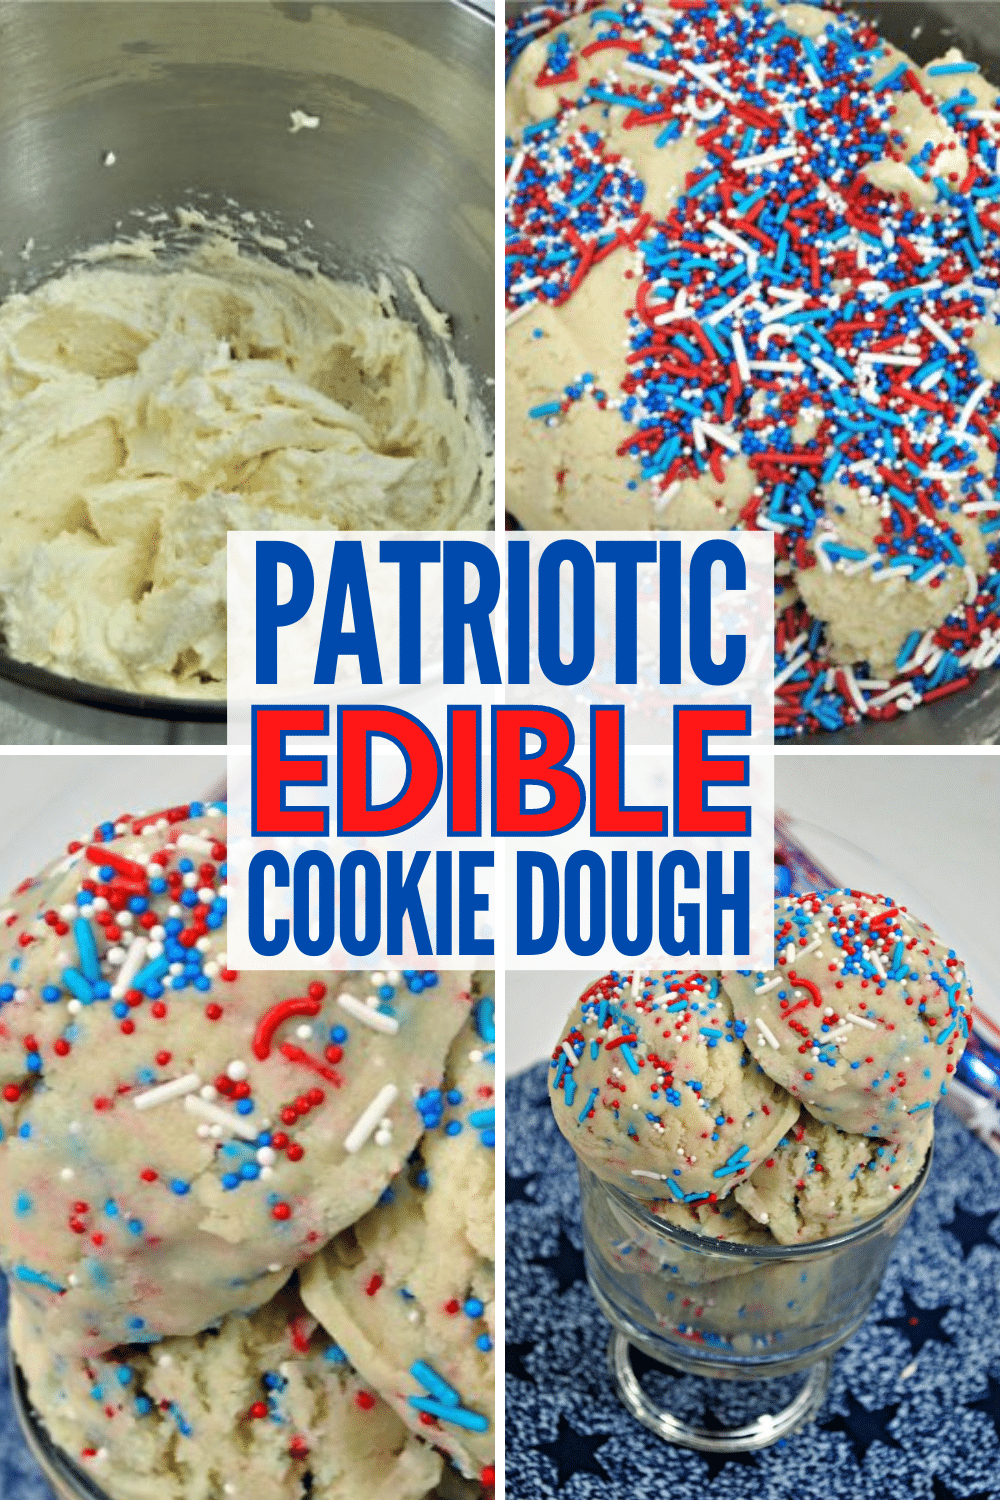 This Patriotic Edible Cookie Dough Recipe is simple to make and safe to eat! Perfect for those patriotic holidays like Memorial Day or 4th of July. #cookiedough #4thofJuly #patriotic via @wondermomwannab